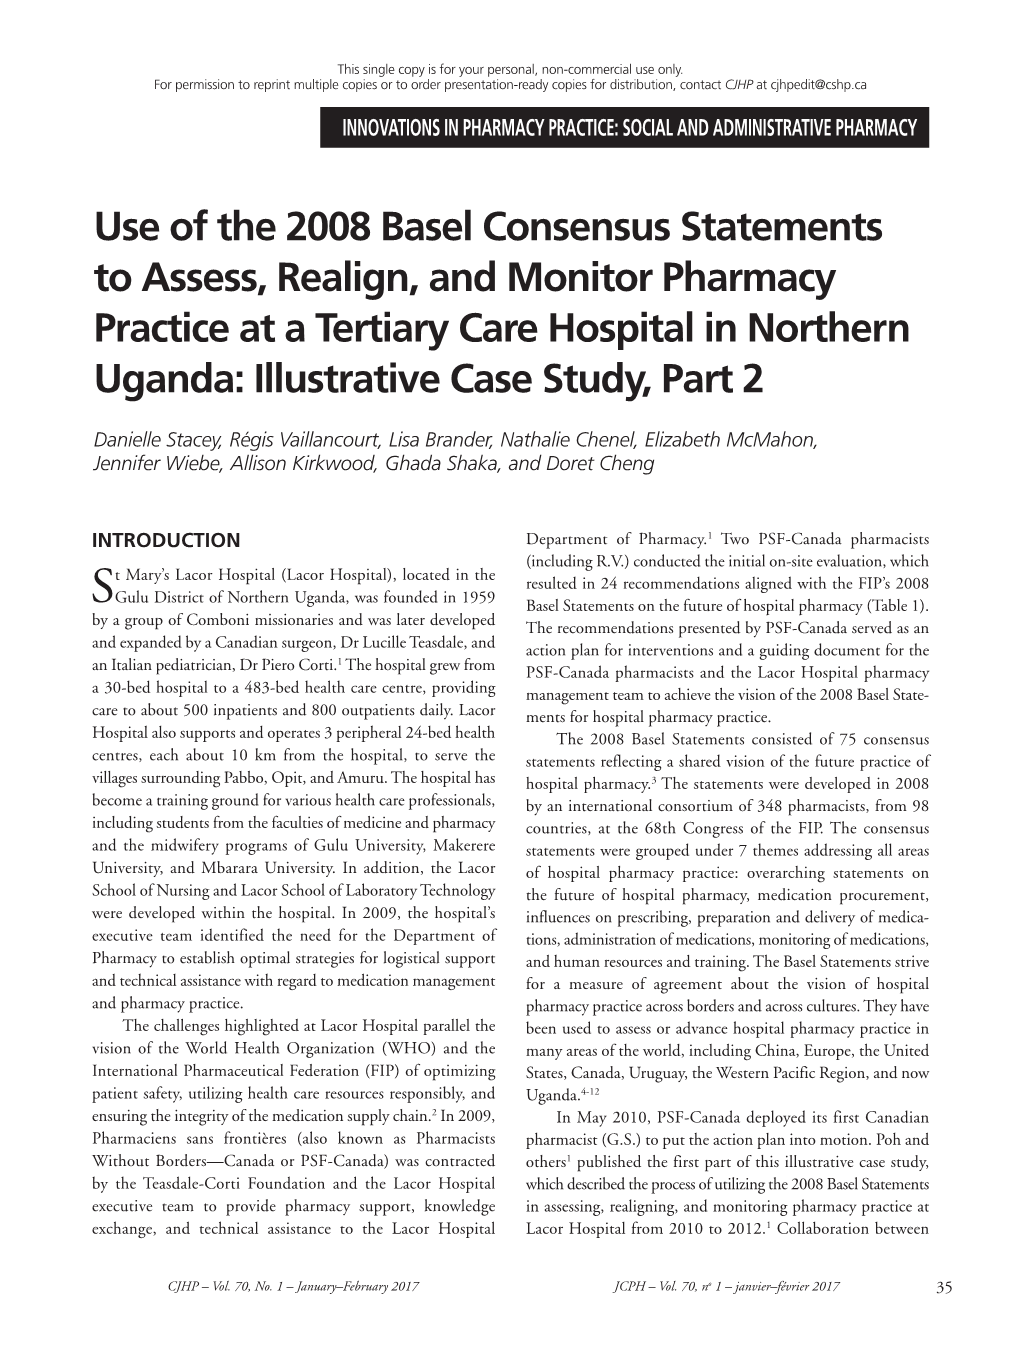 Use of the 2008 Basel Consensus Statements to Assess, Realign, and Monitor Pharmacy Practice at a Tertiary Care Hospital in Nort